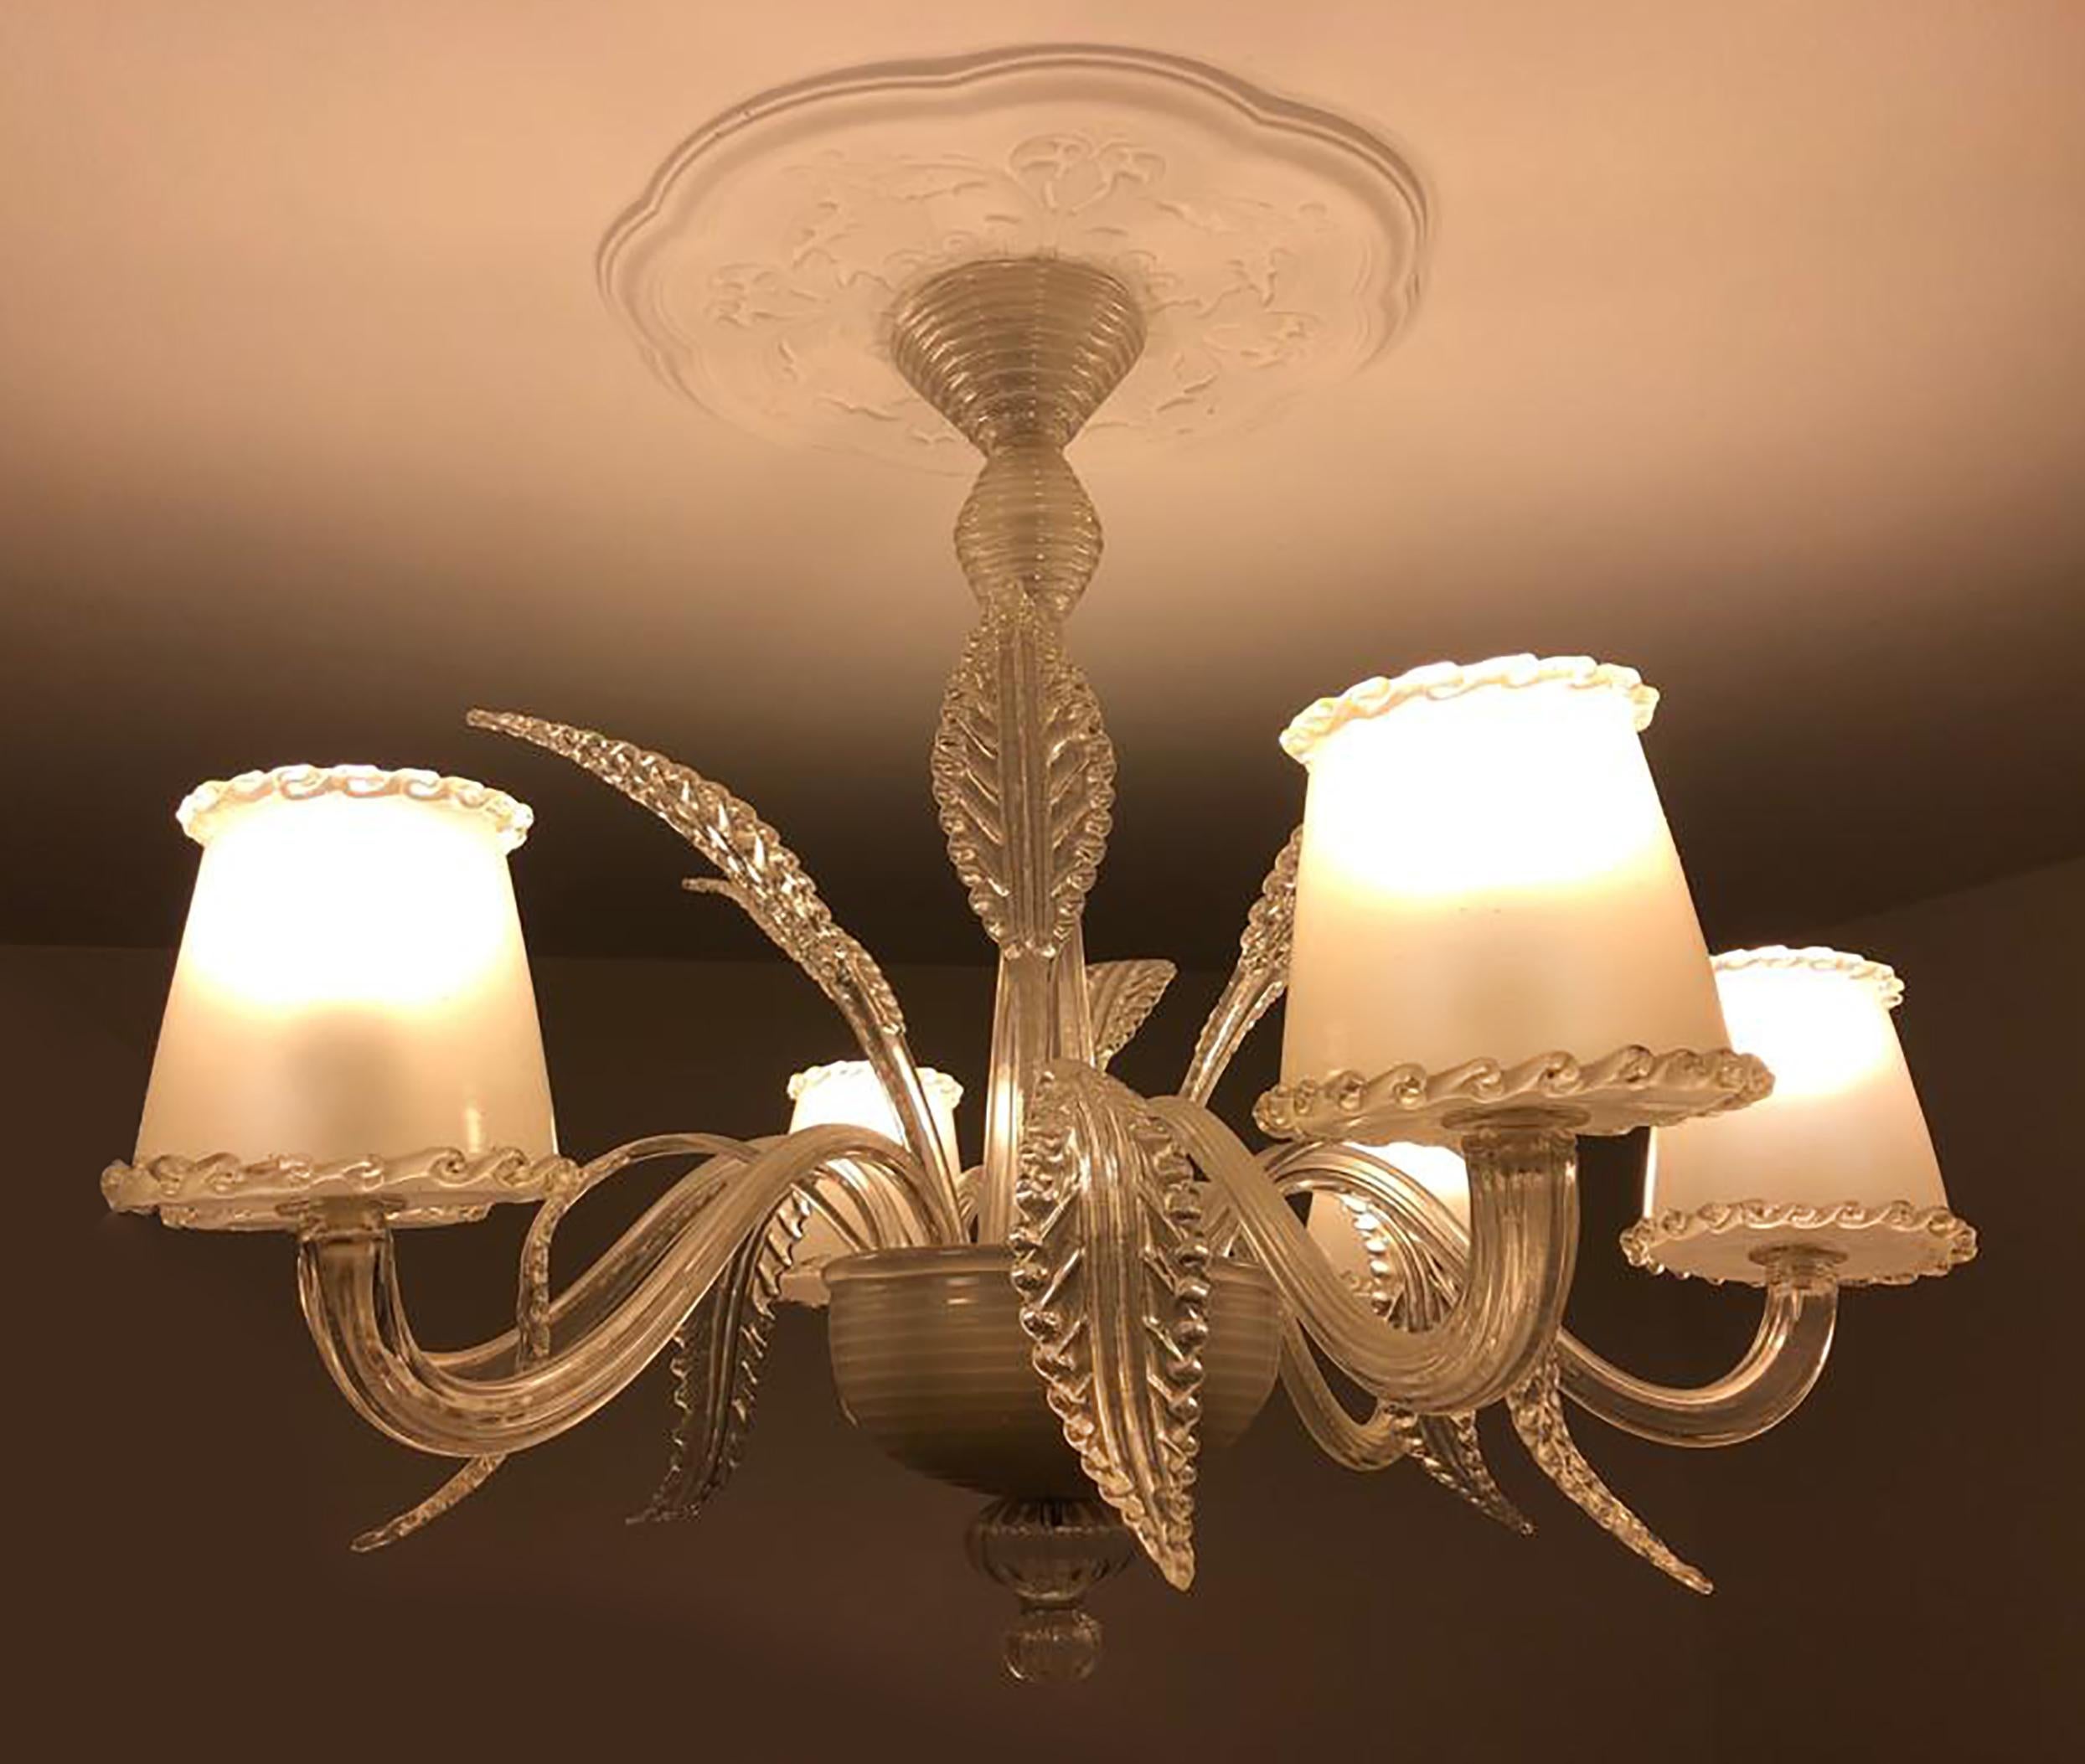 Brass Mid-20th Century Italian Chandelier by Barovier & Toso, Murano, 1940s For Sale